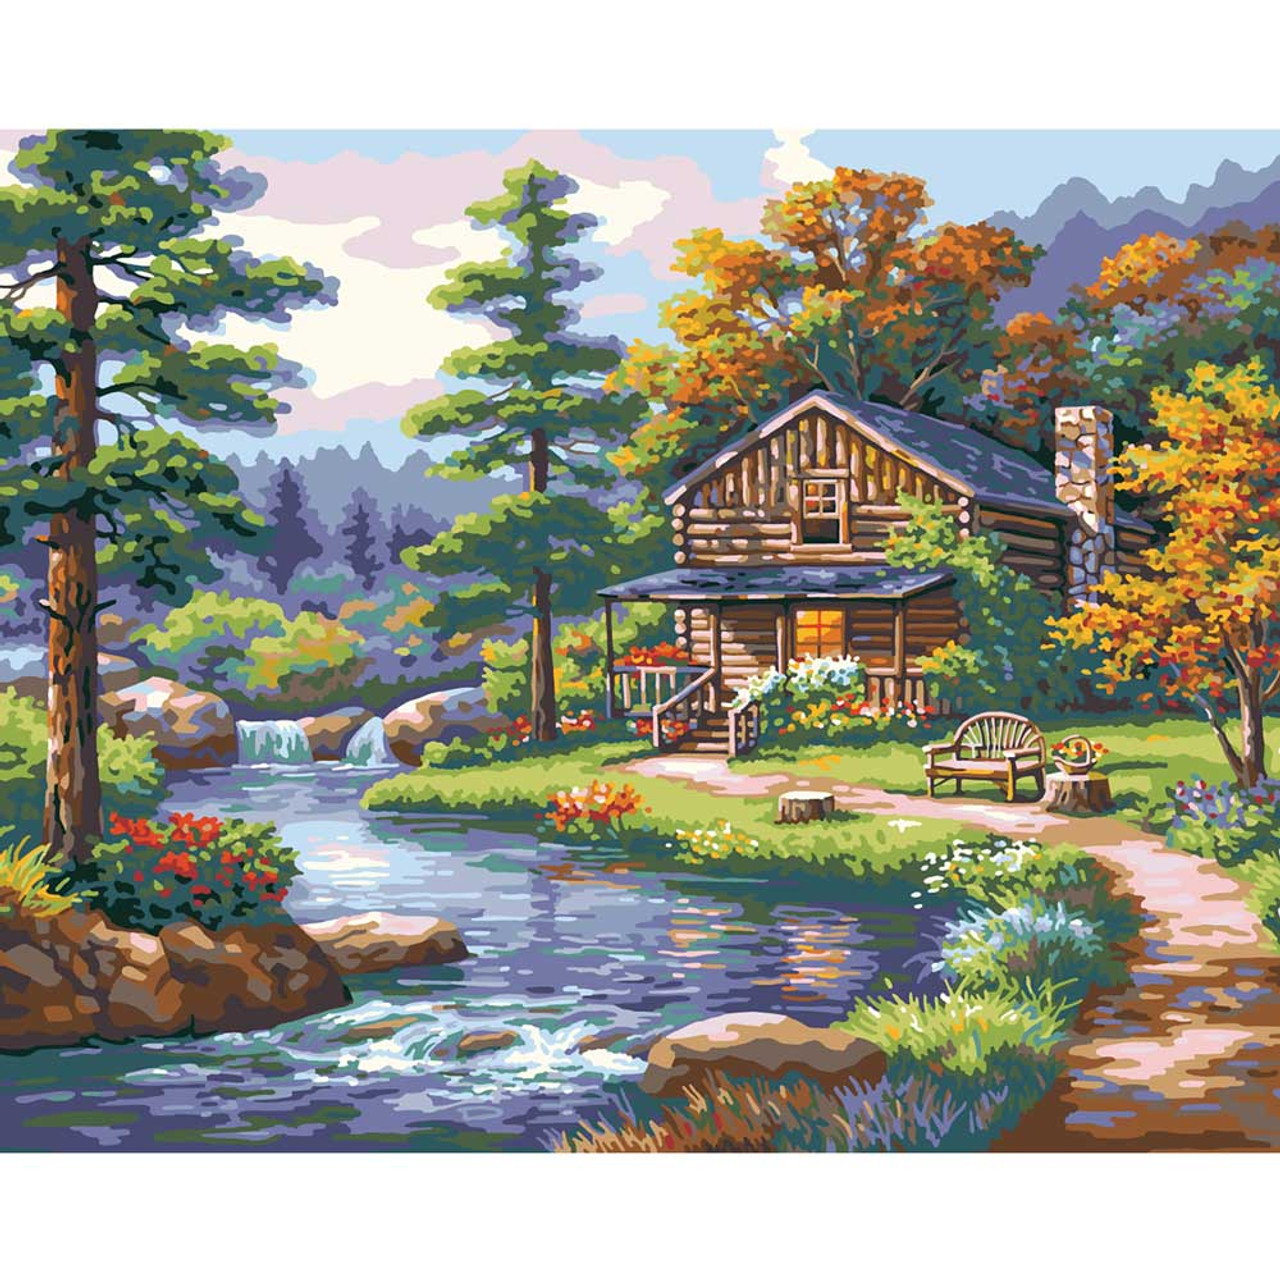 Plaid Paint by Number Kit, Old Farm House, 16 x 20